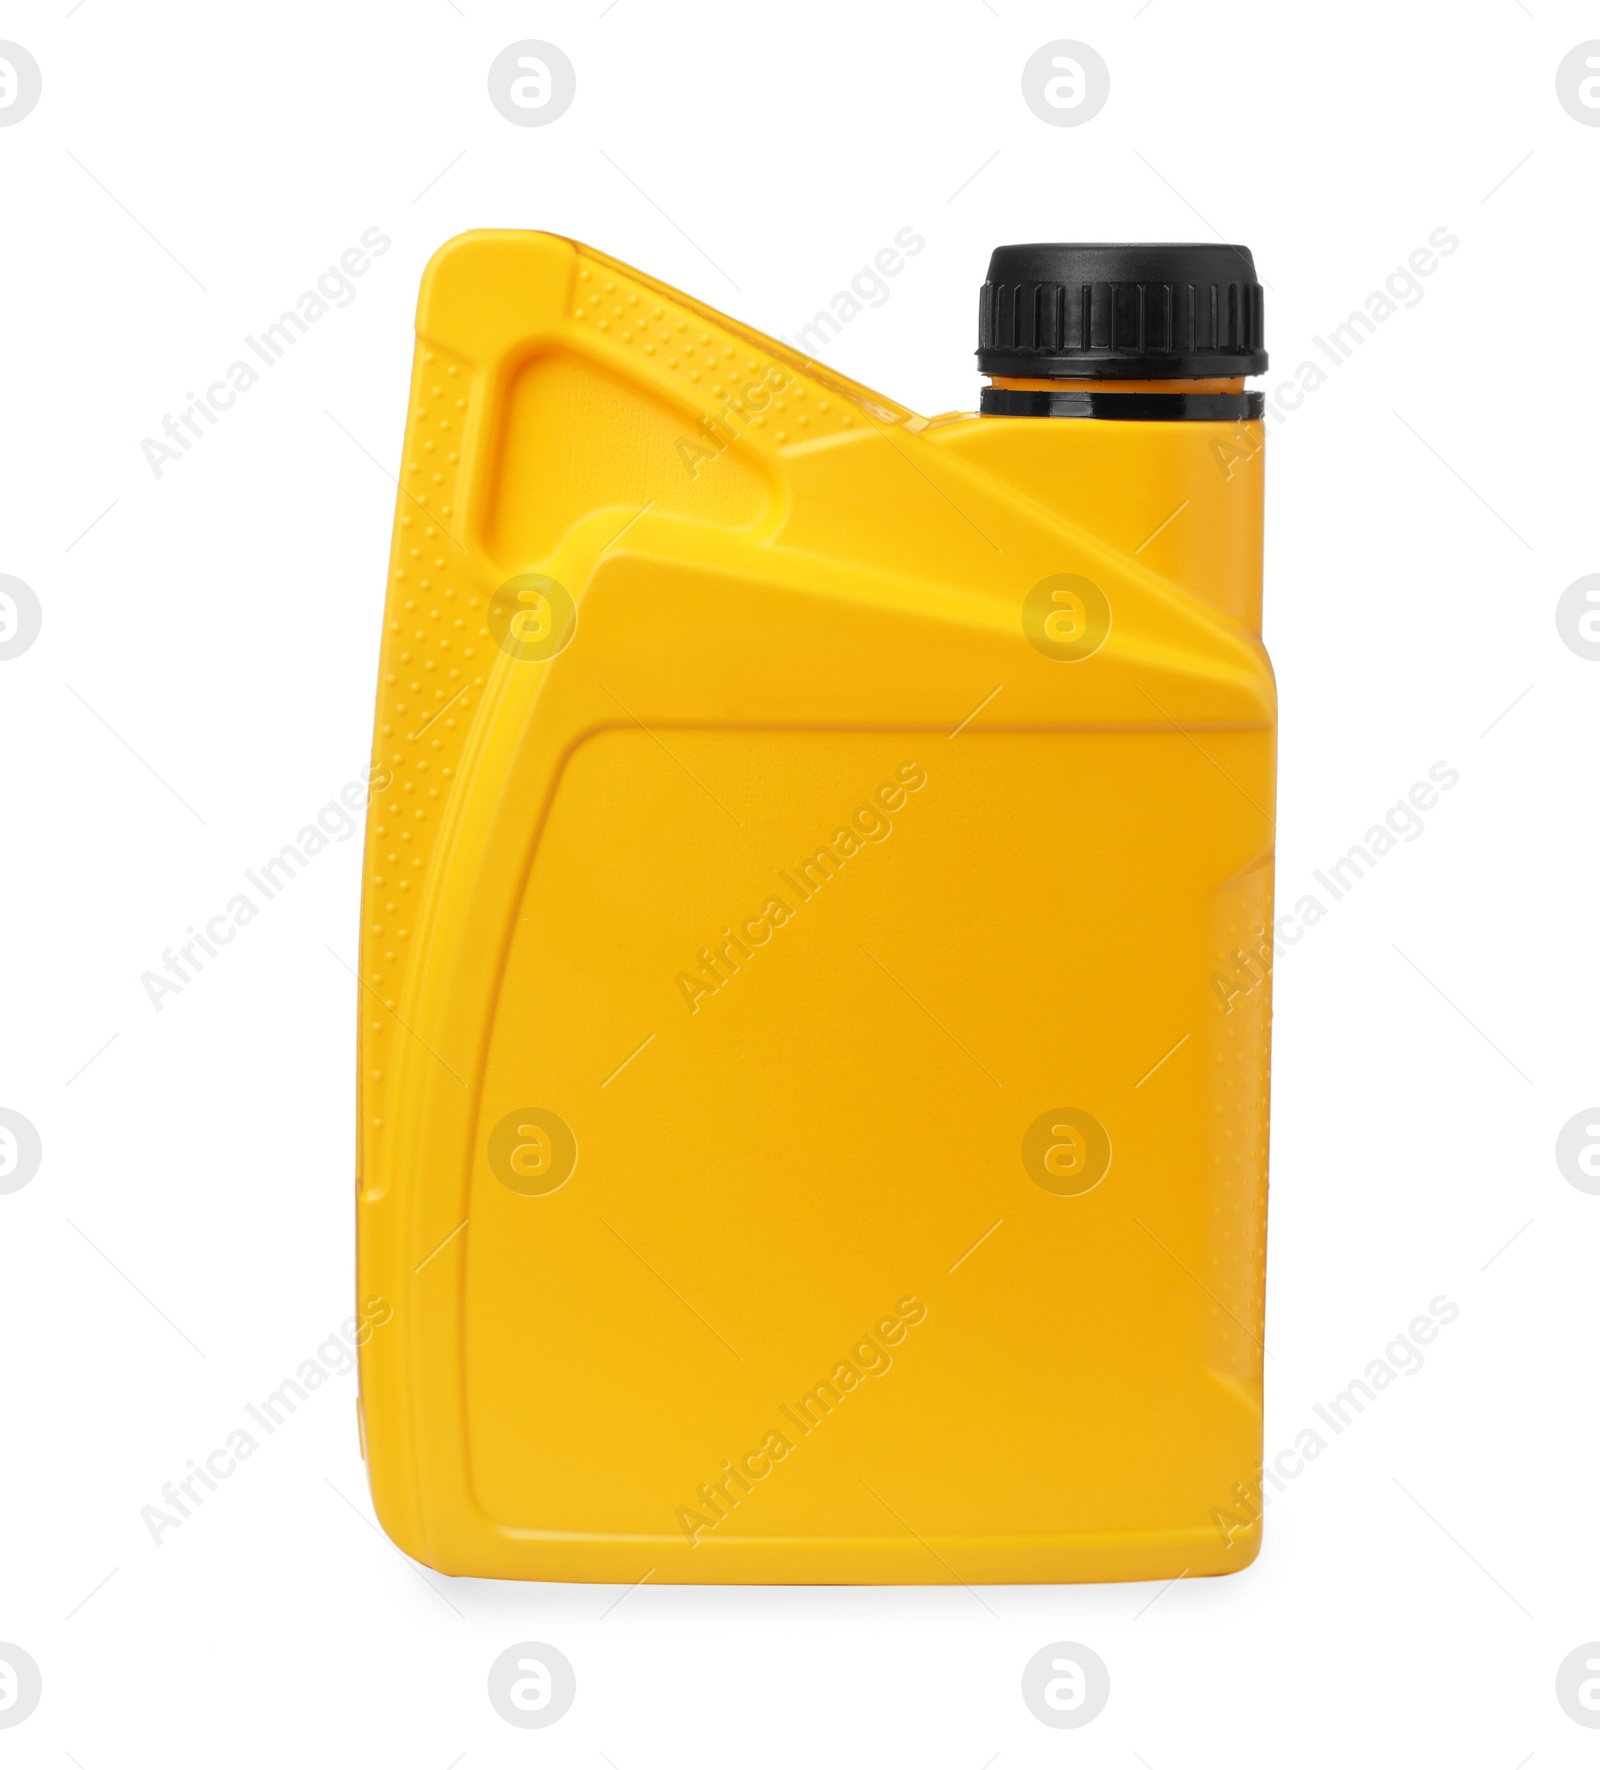 Photo of Blank yellow canister of car product isolated on white